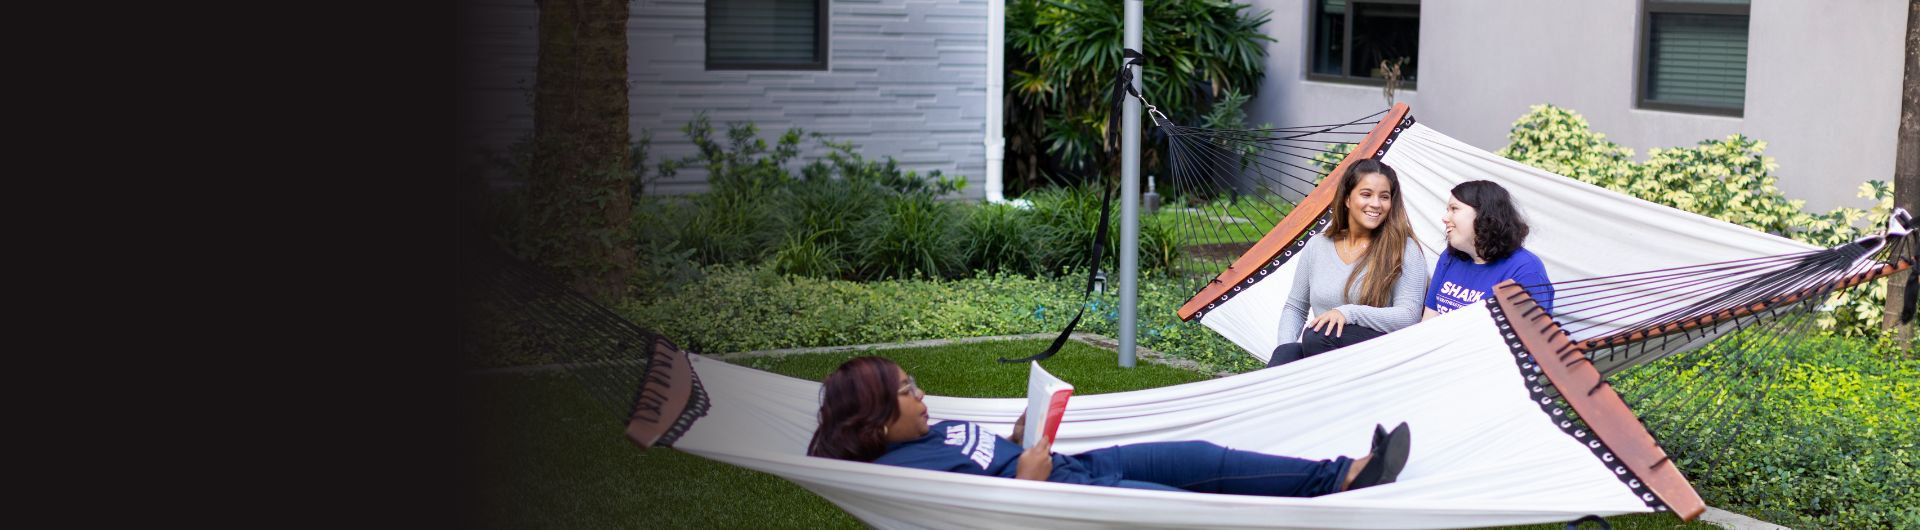 Two hammocks occupied by three students. One student is comfortably stretched out while reading a book. The other two are sitting, chatting, and laughing.